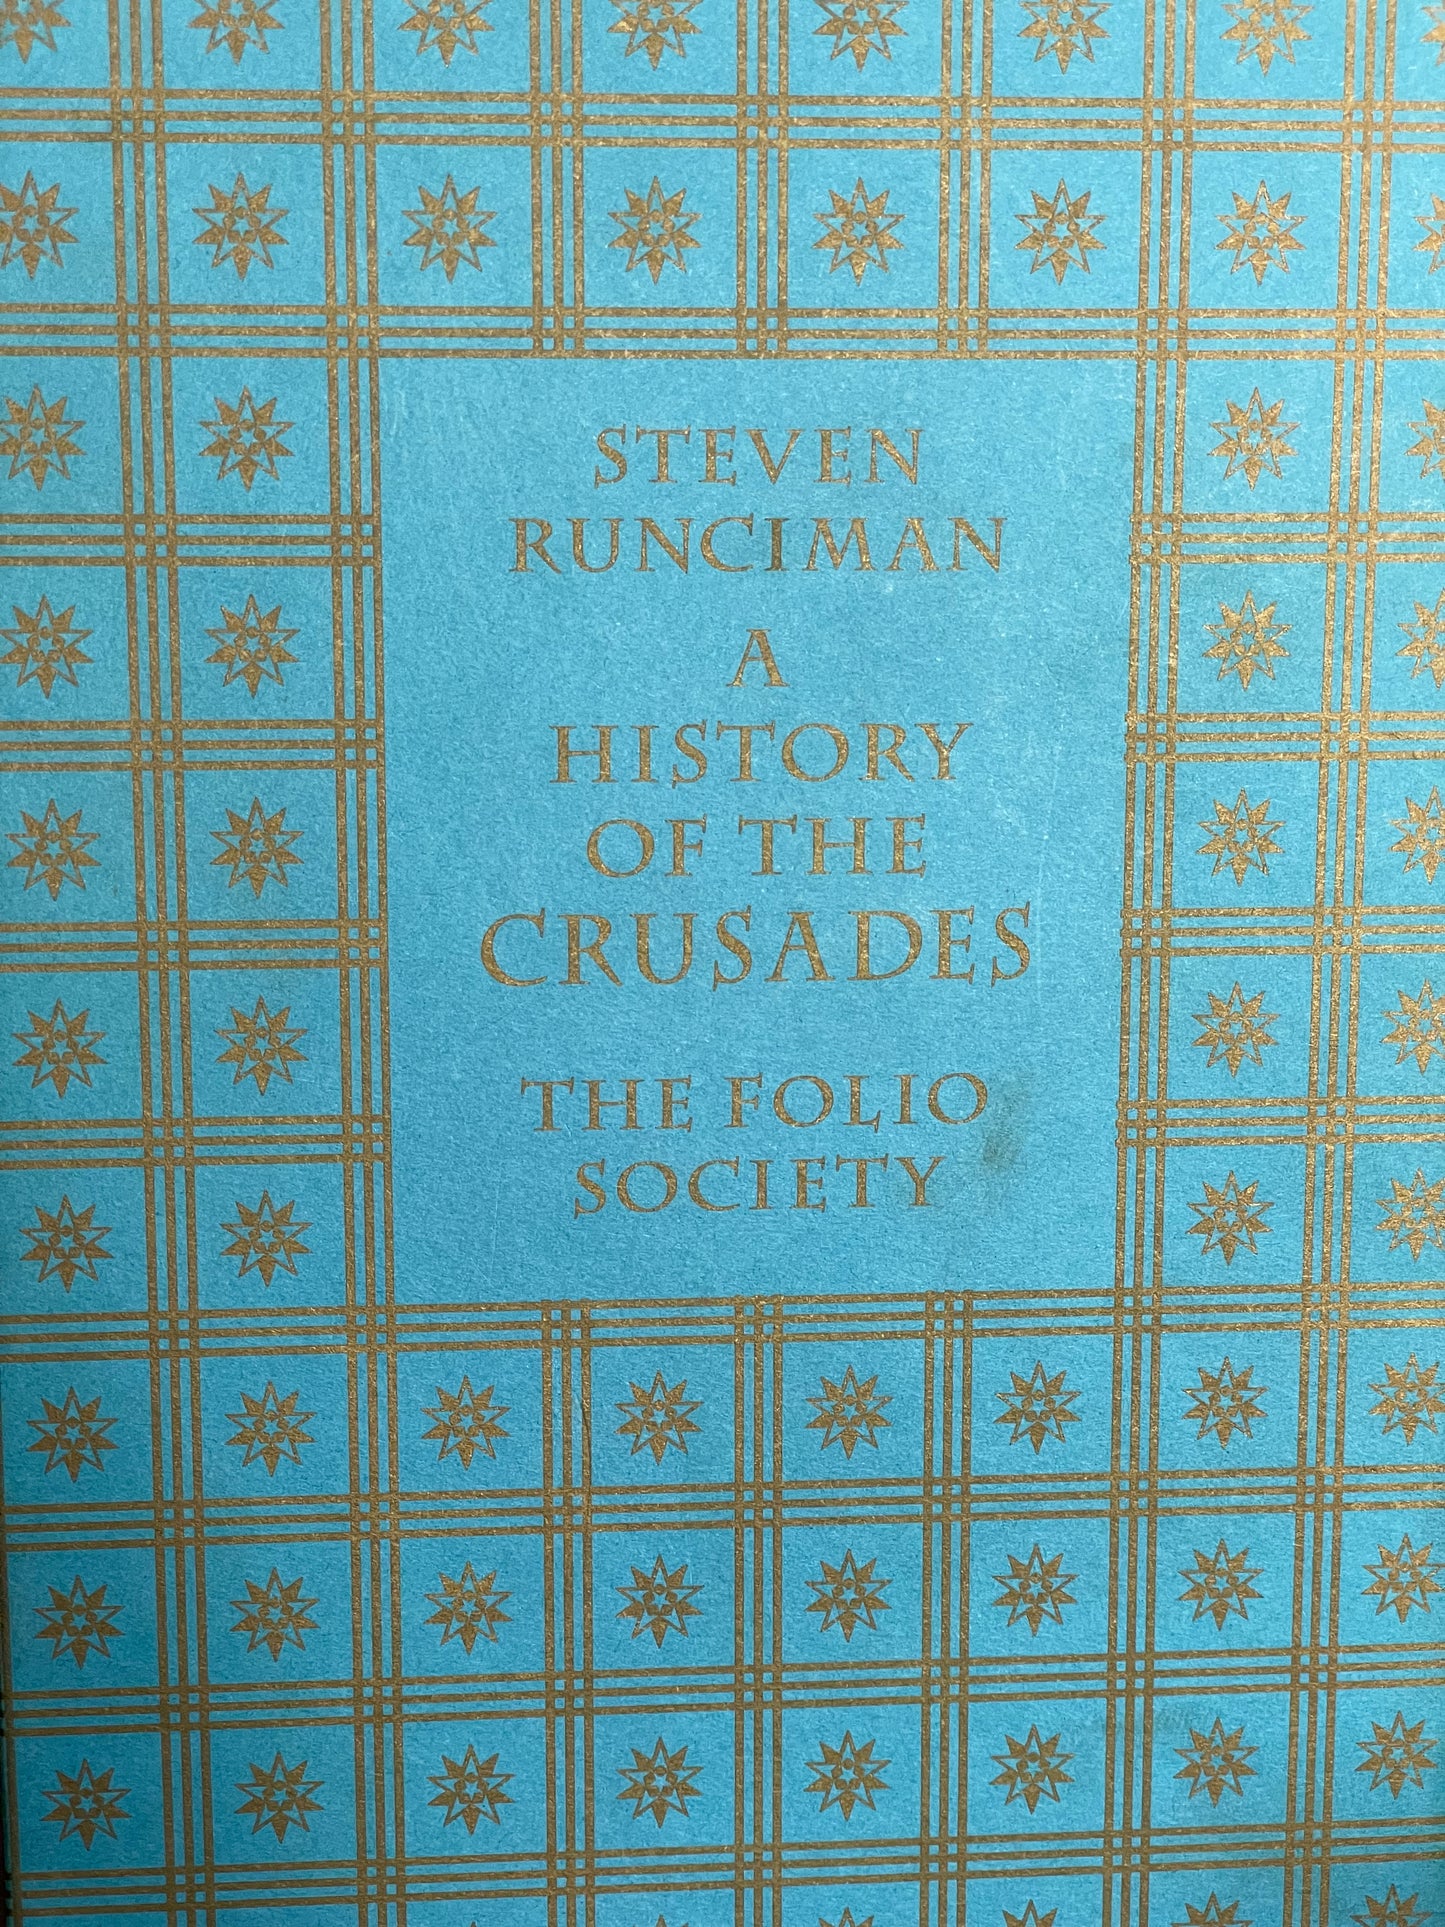 A History of The Crusades by Steven Runciman